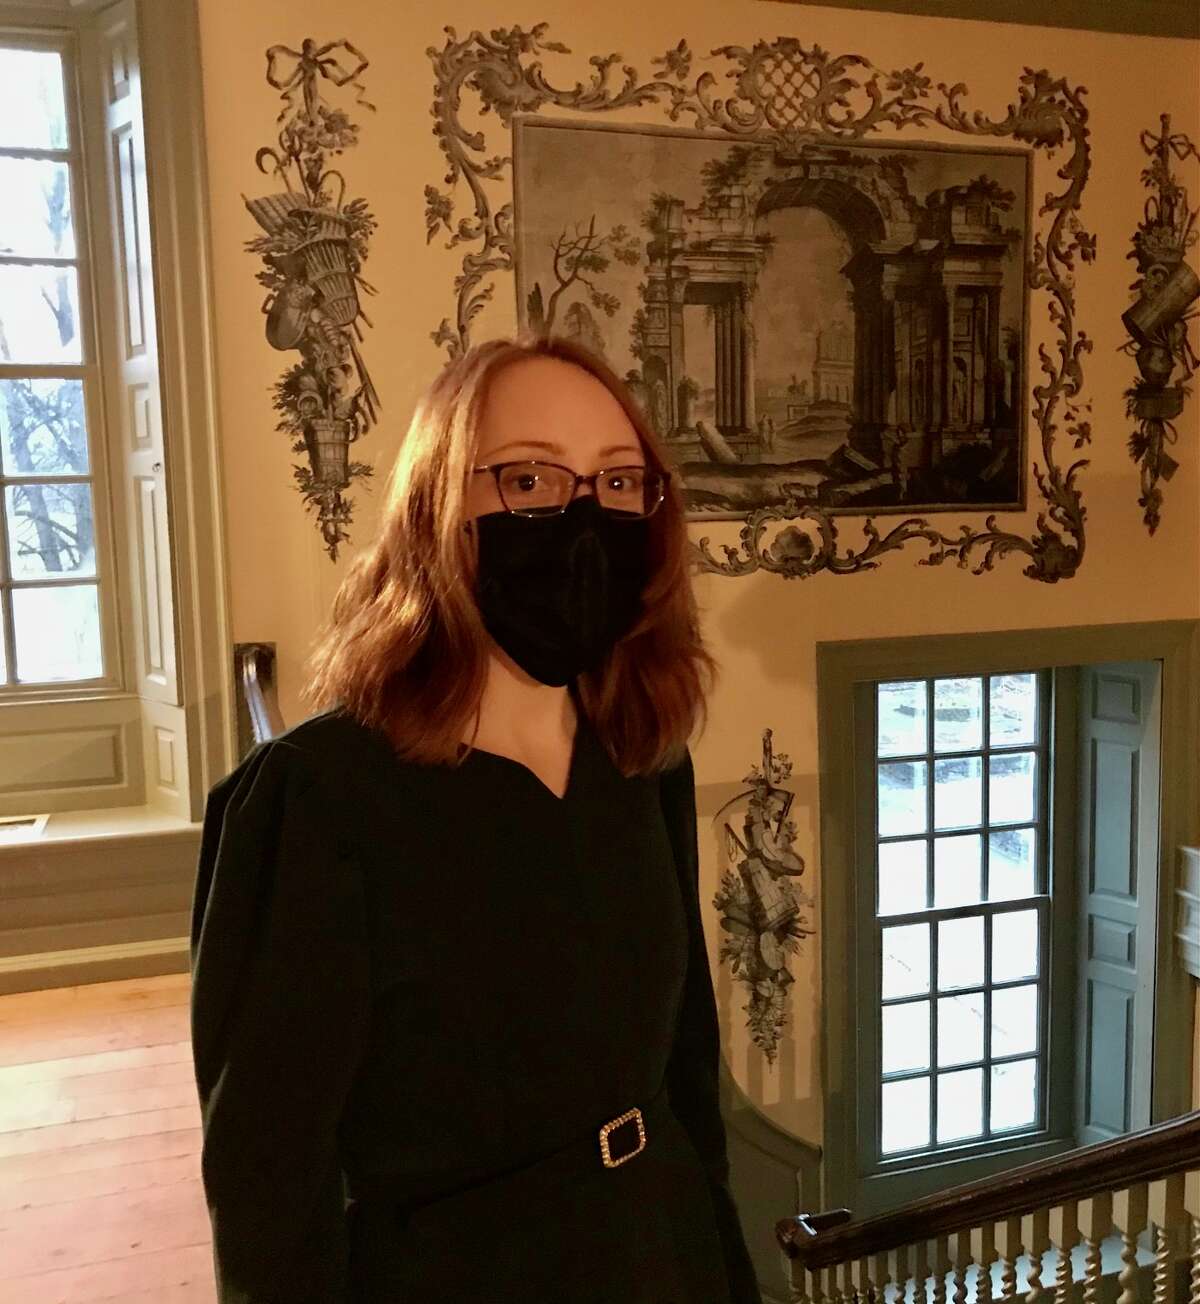 Jessie Serfilippi, a 27-year-old novice historian, caused a stir and received national media attention after publishing an article on the Schuyler Mansion’s website recently that debunked the myth of Founding Father Alexander Hamilton as an abolitionist and documented his role as a trader and owner of enslaved people.